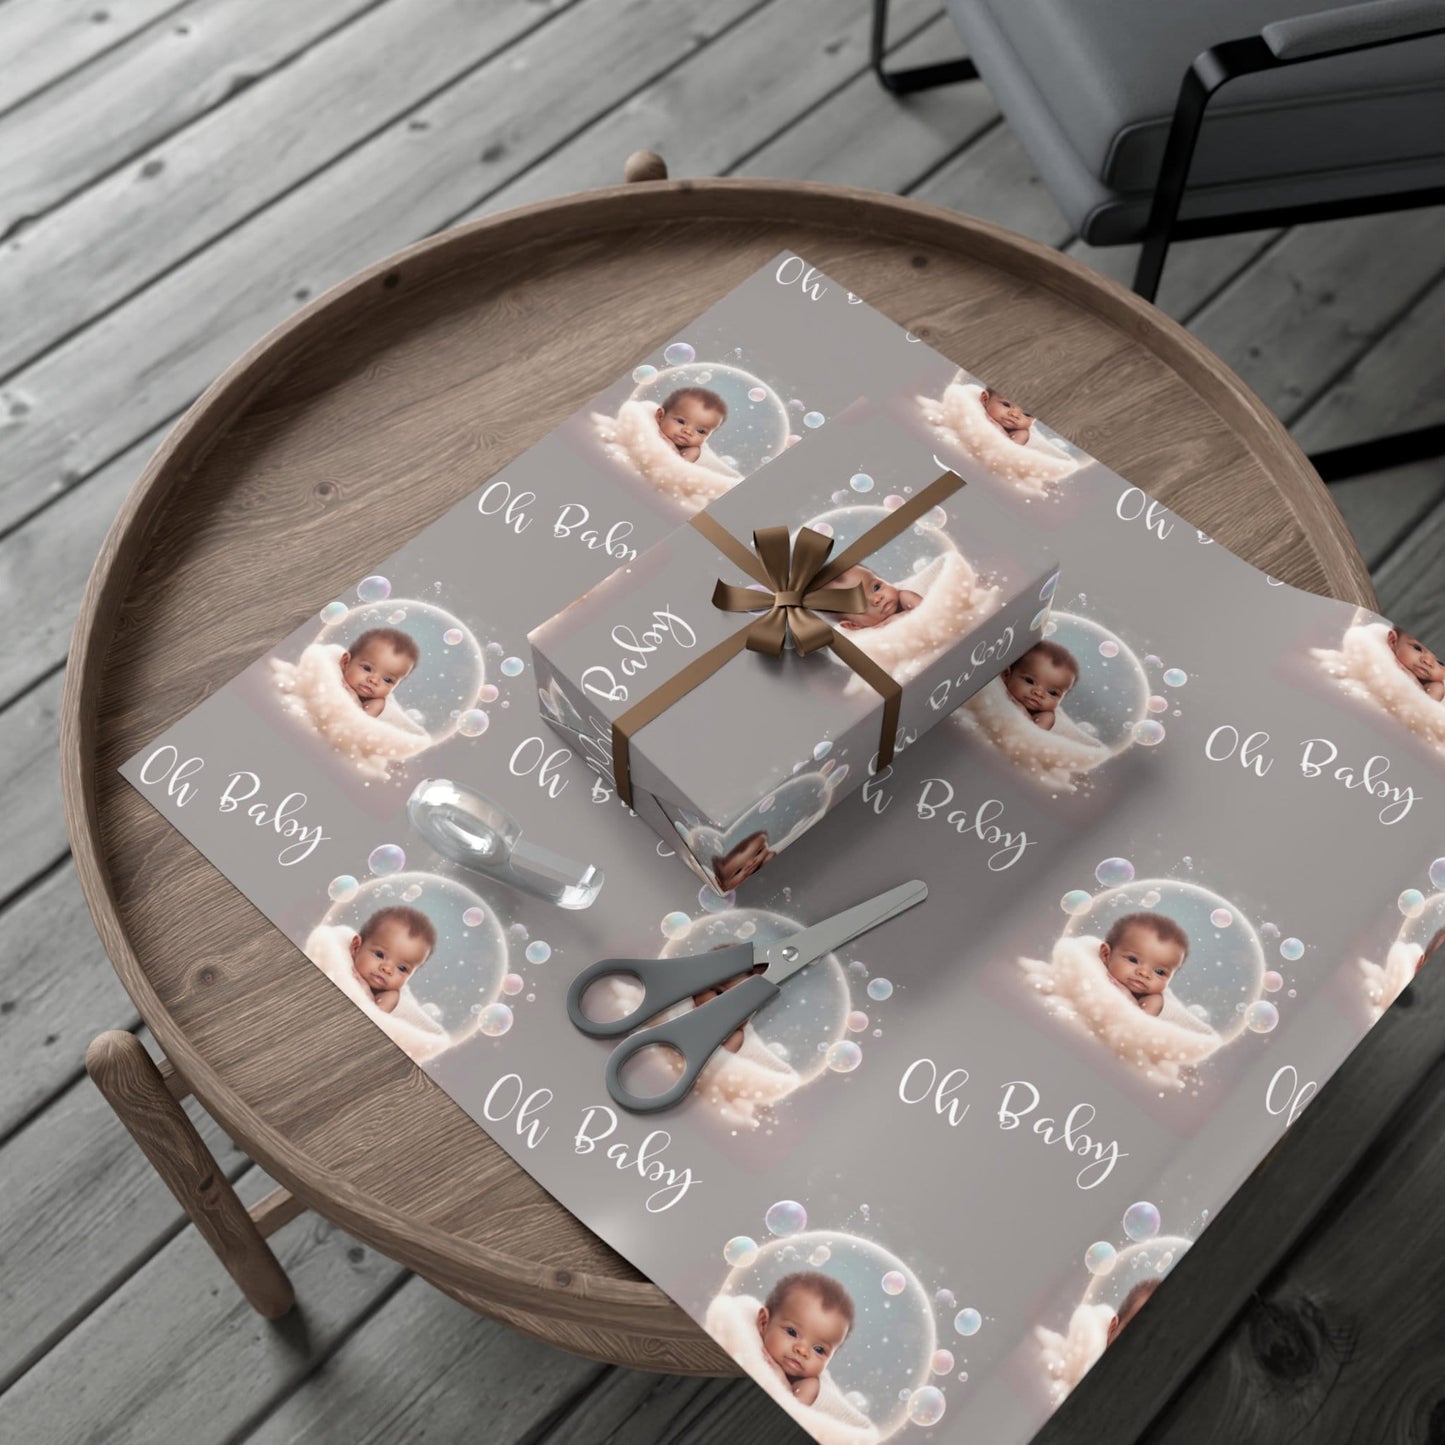 Oh Baby - Baby Shower Gift Wrap